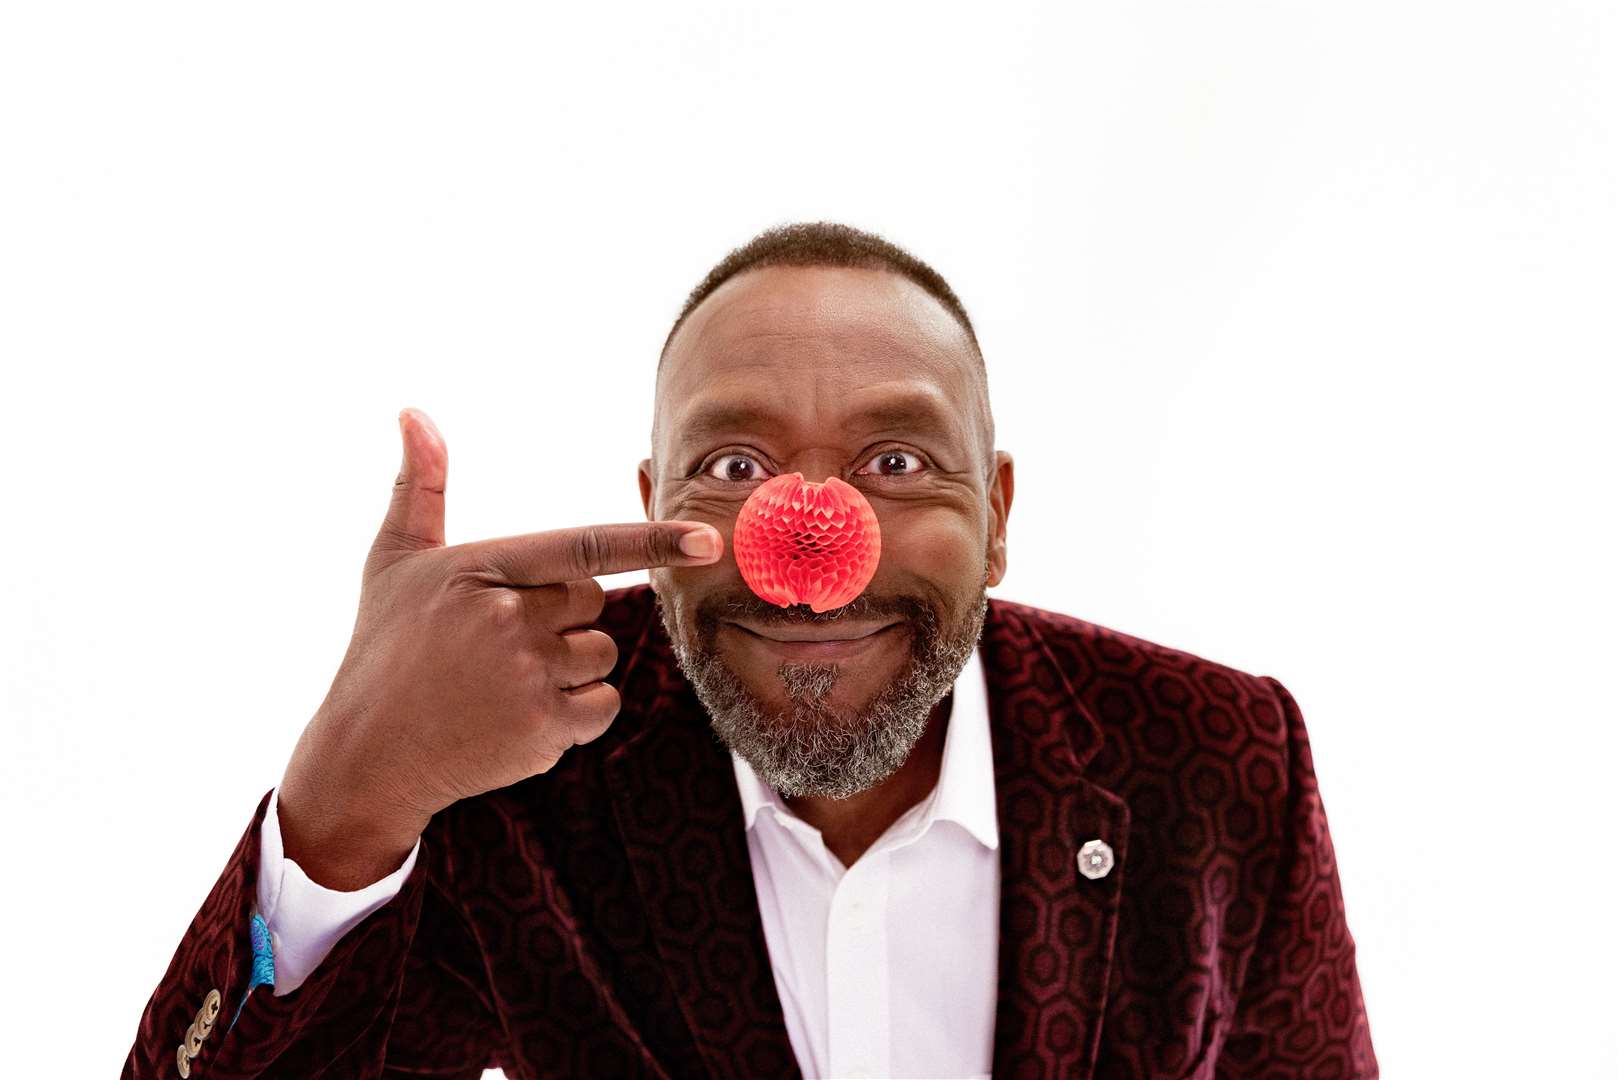 The new red nose, pictured here with Lenny Henry, has been designed by the man behind Apple's iPhone. Image: Comic Relief.